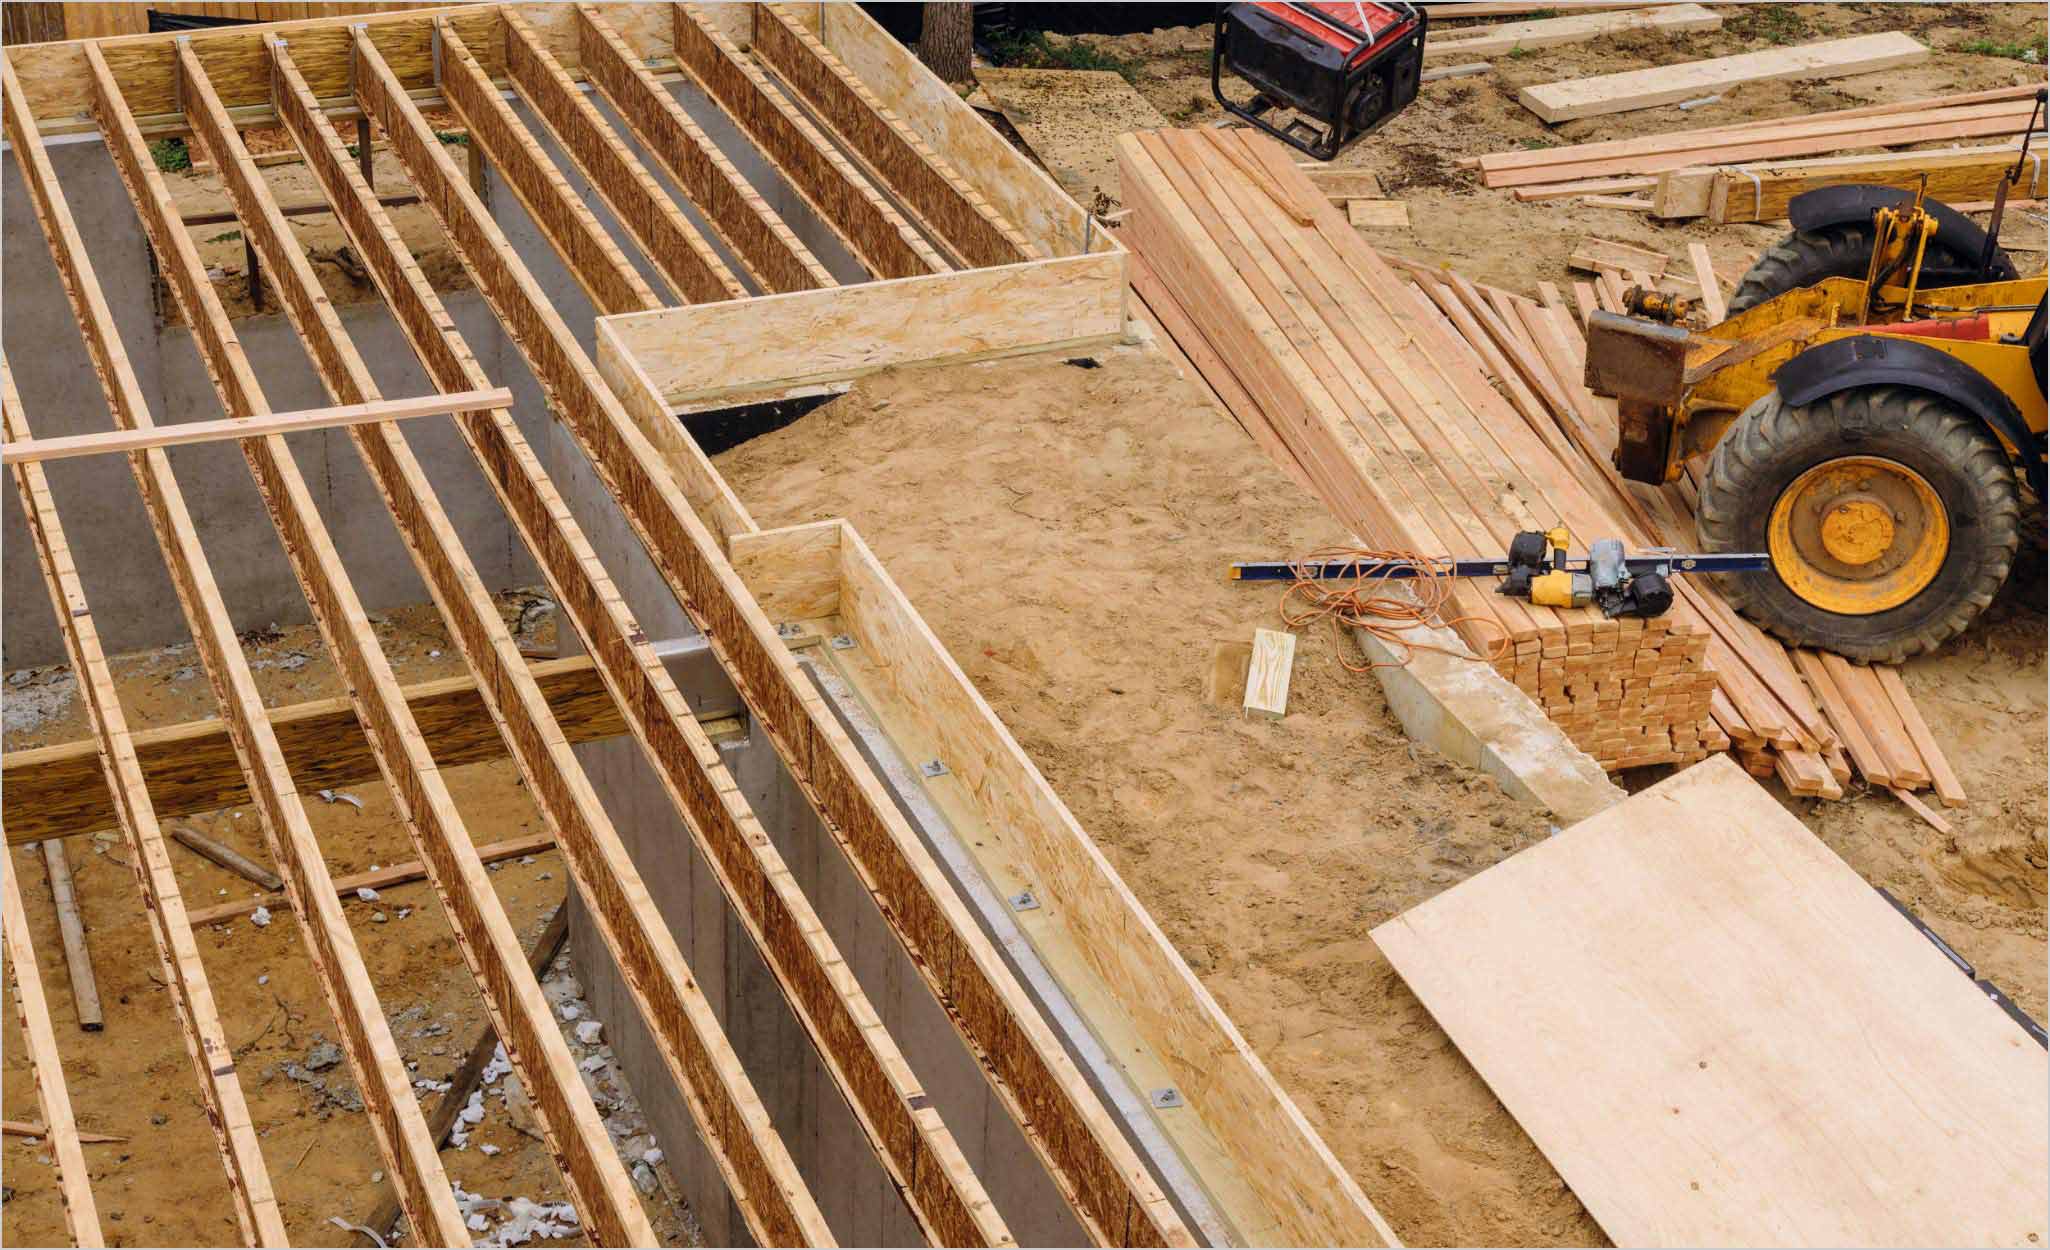 Builders frame the basement joists and subfloor of a house.